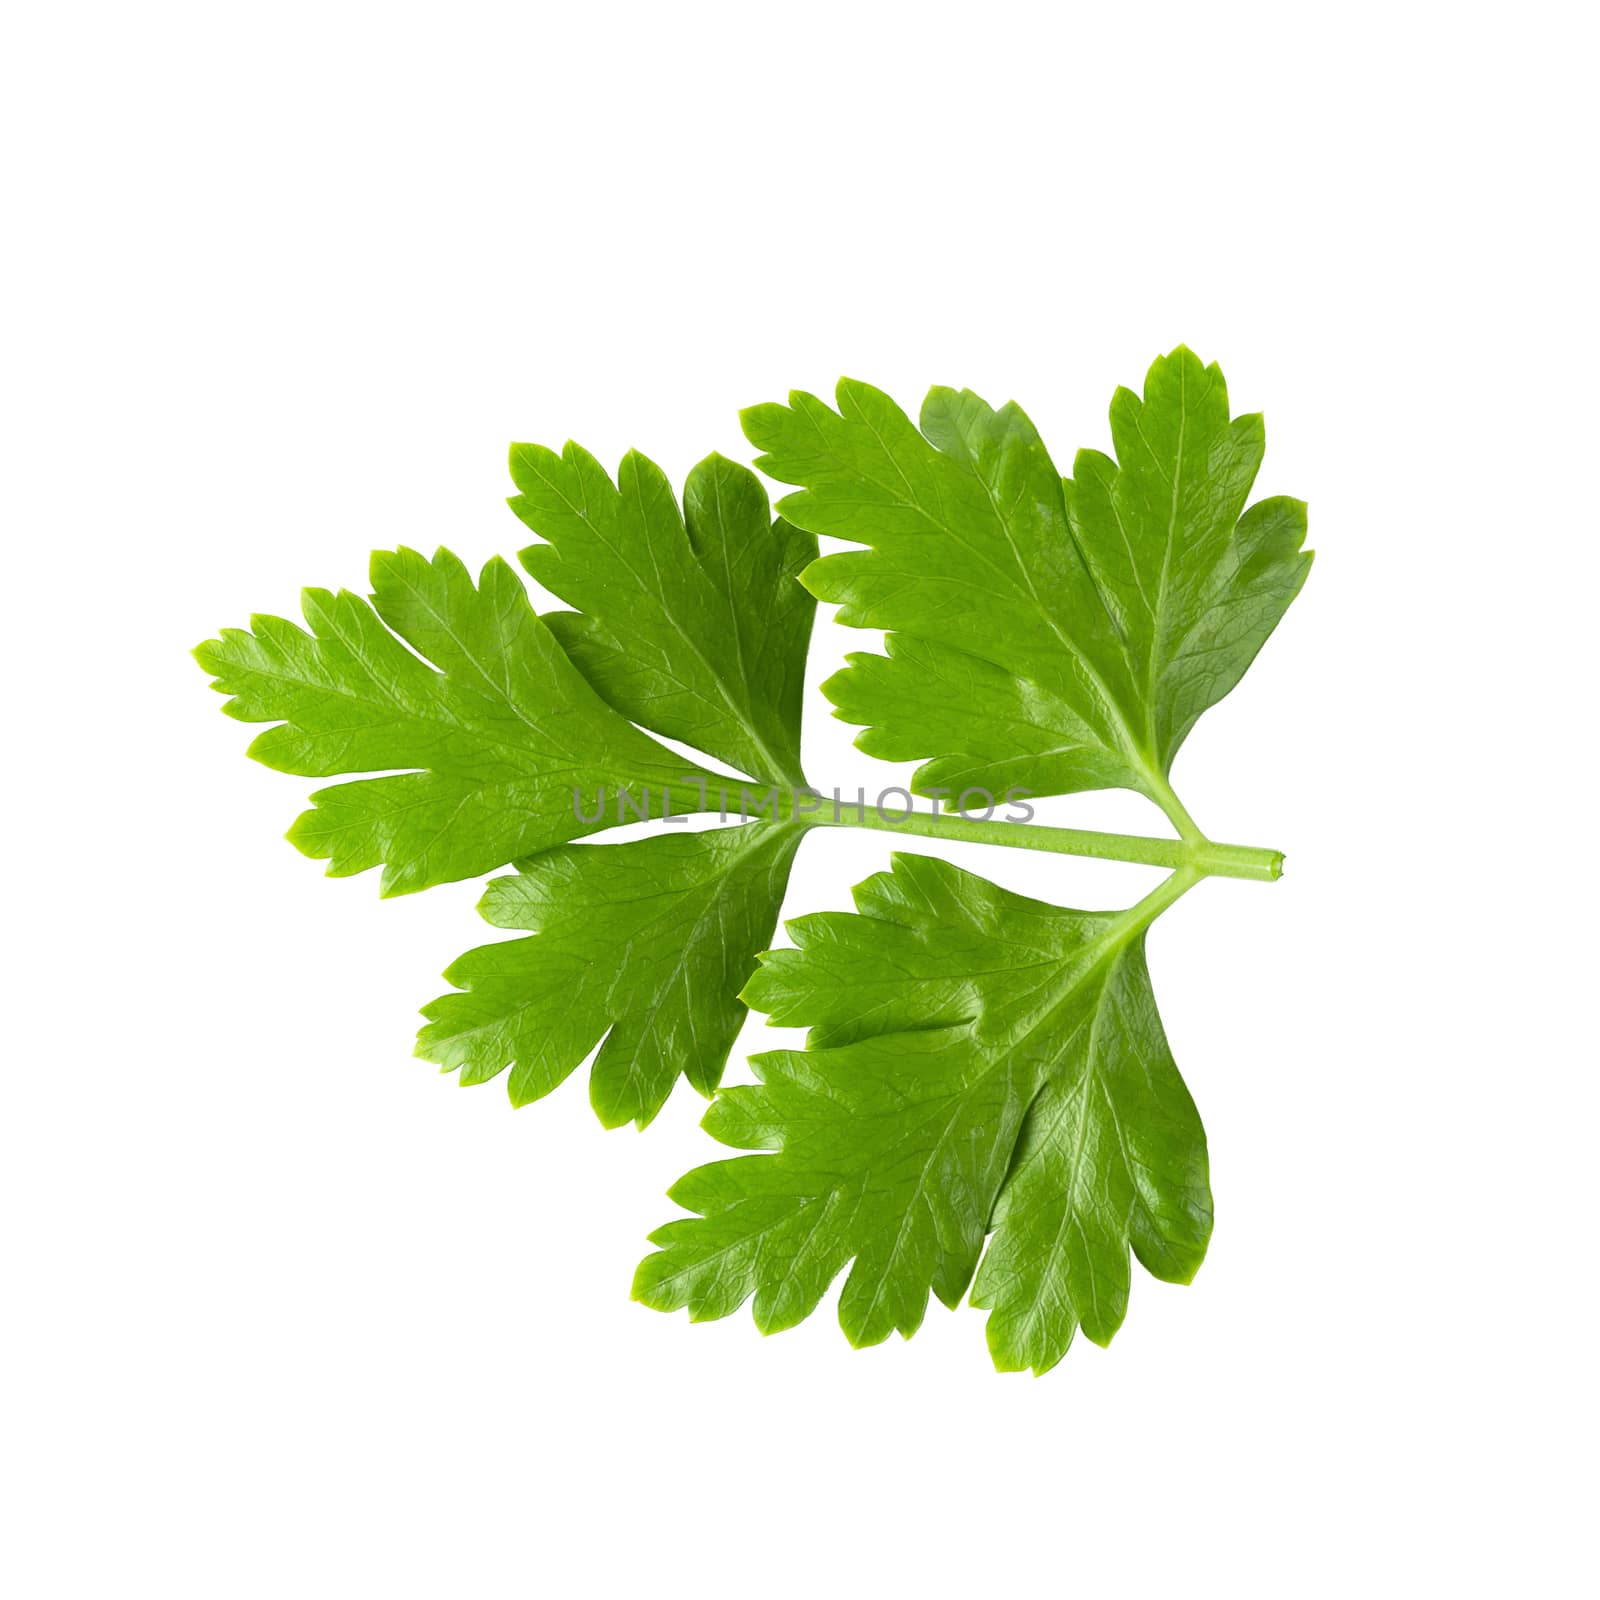 Bunch leaves parsley isolated on white background